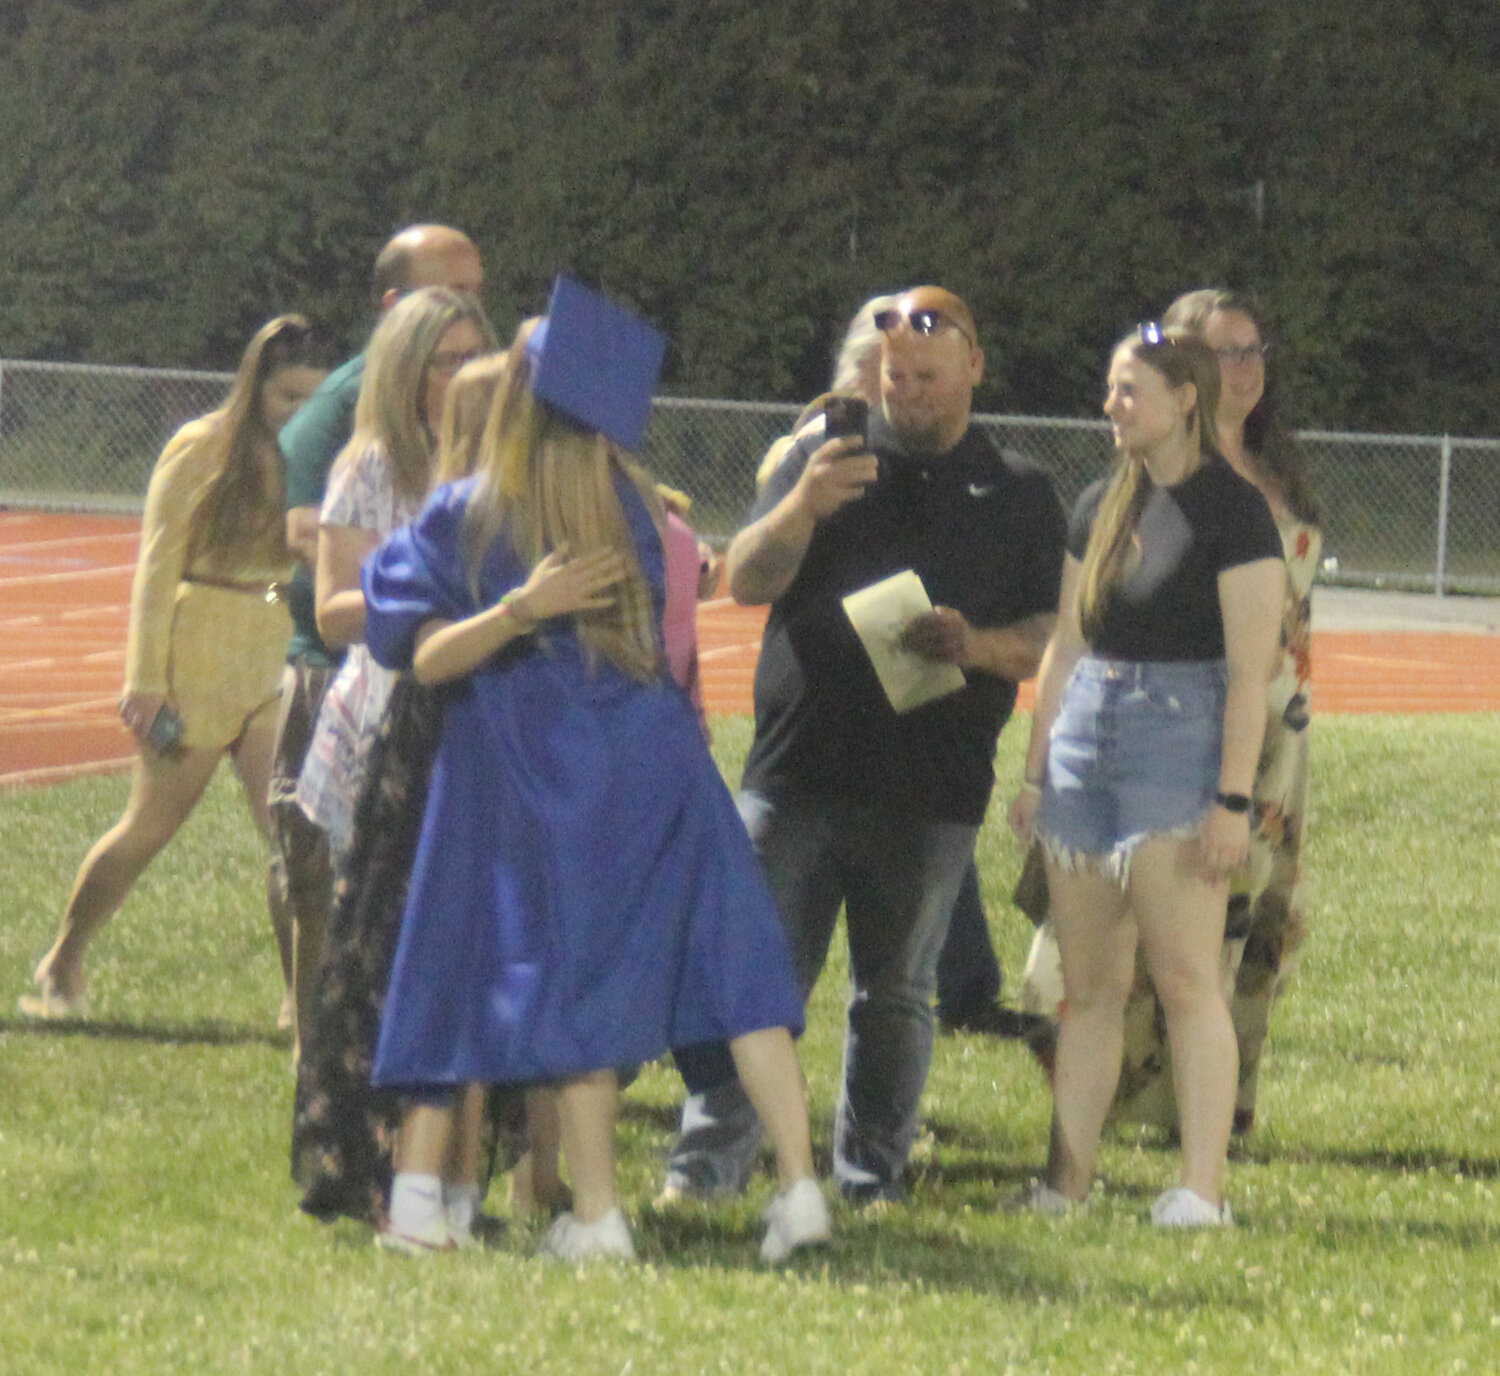 A Wright City High School graduate is embraced by her family following the ceremony.